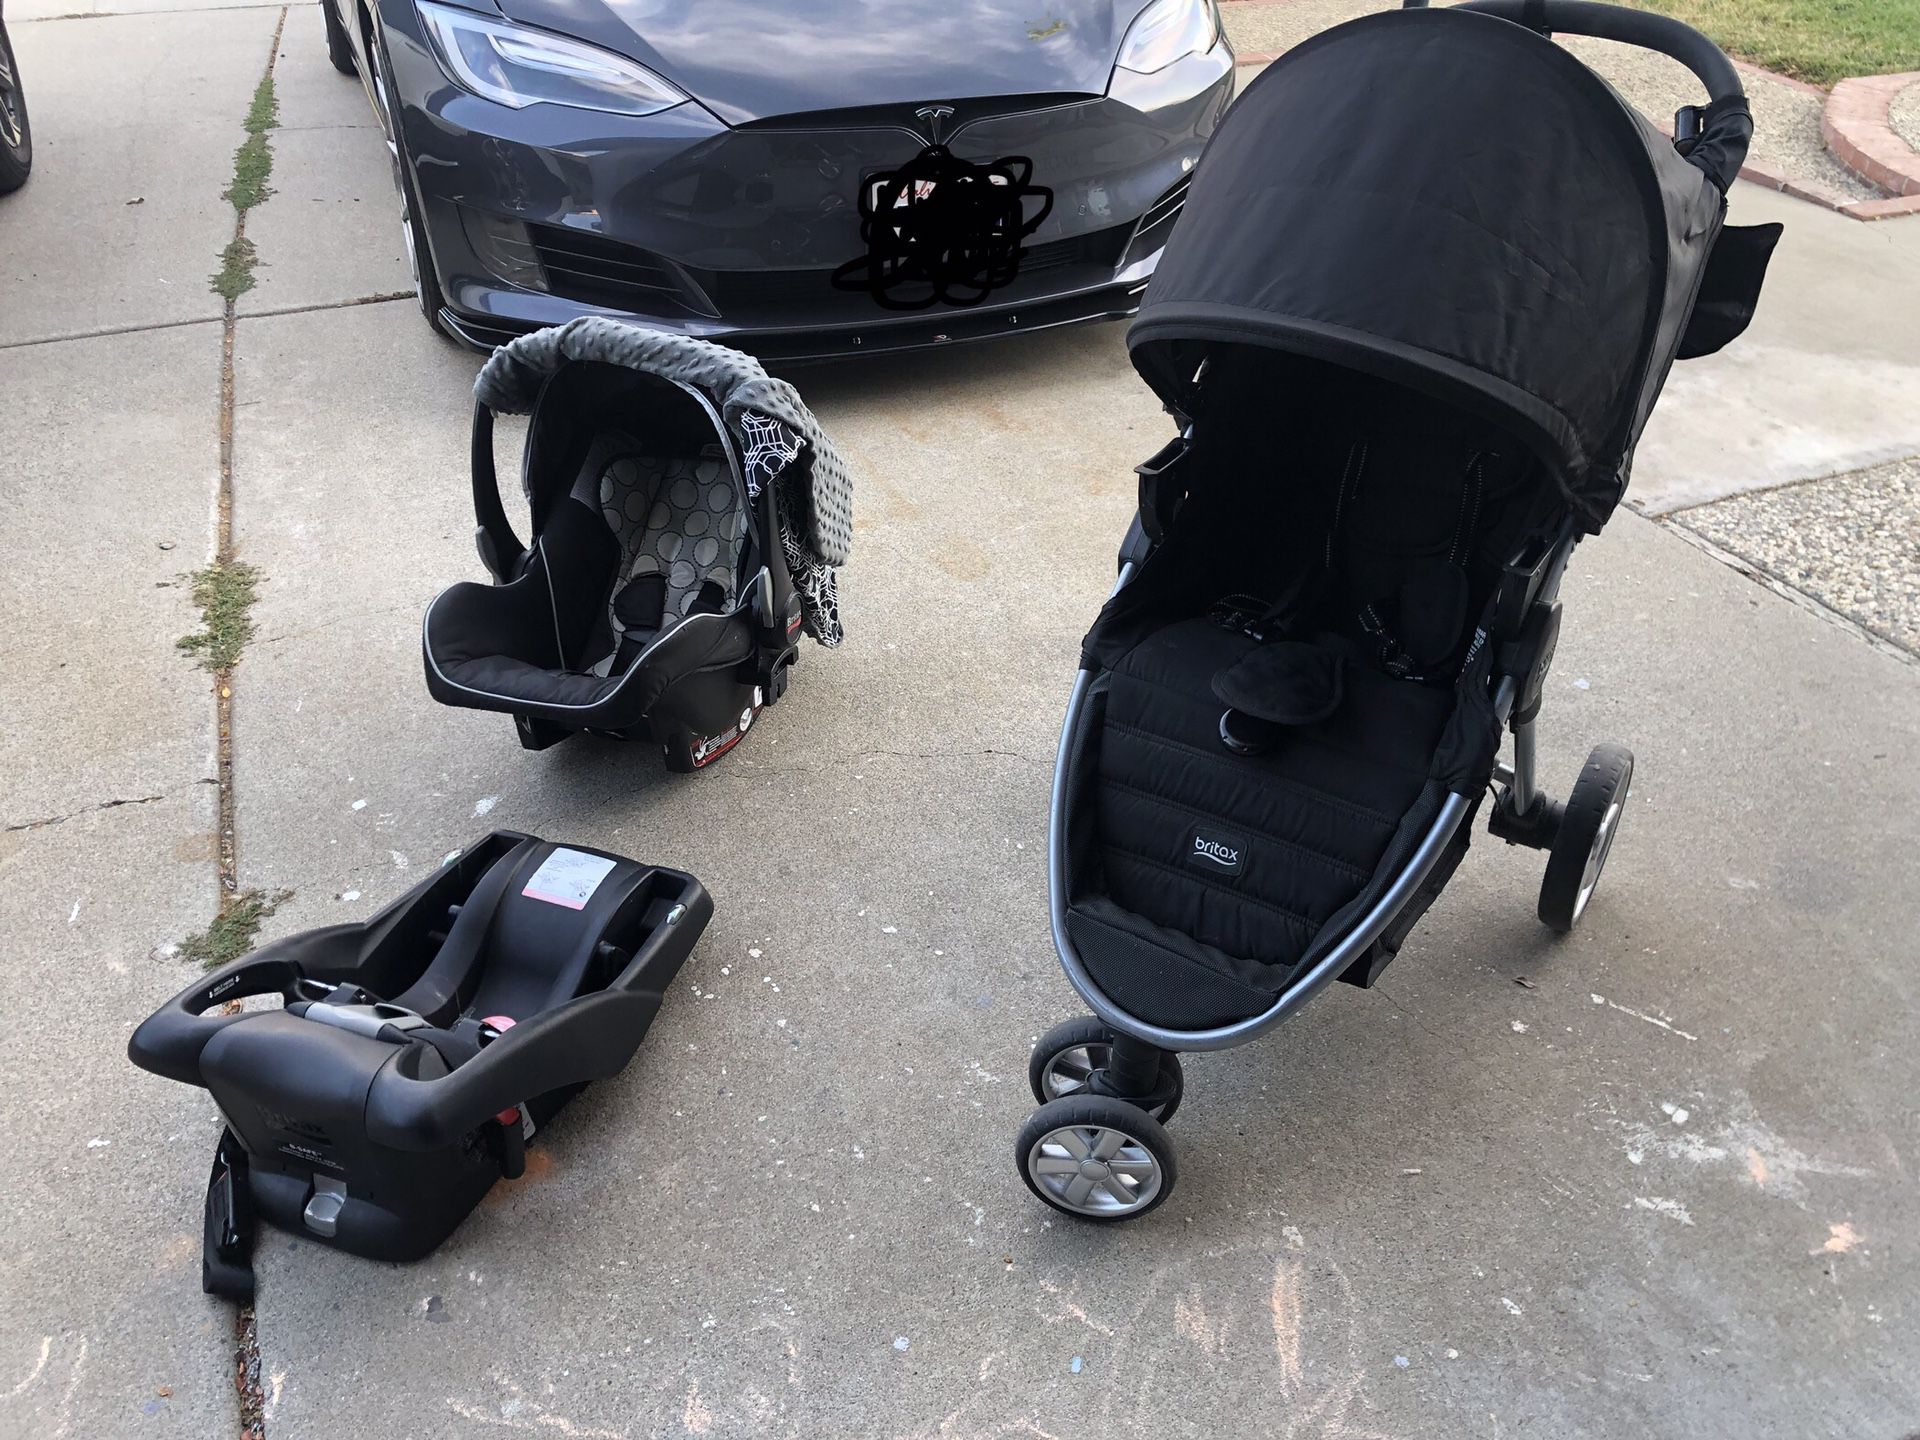 Britax infant car seat, base and stroller - $60